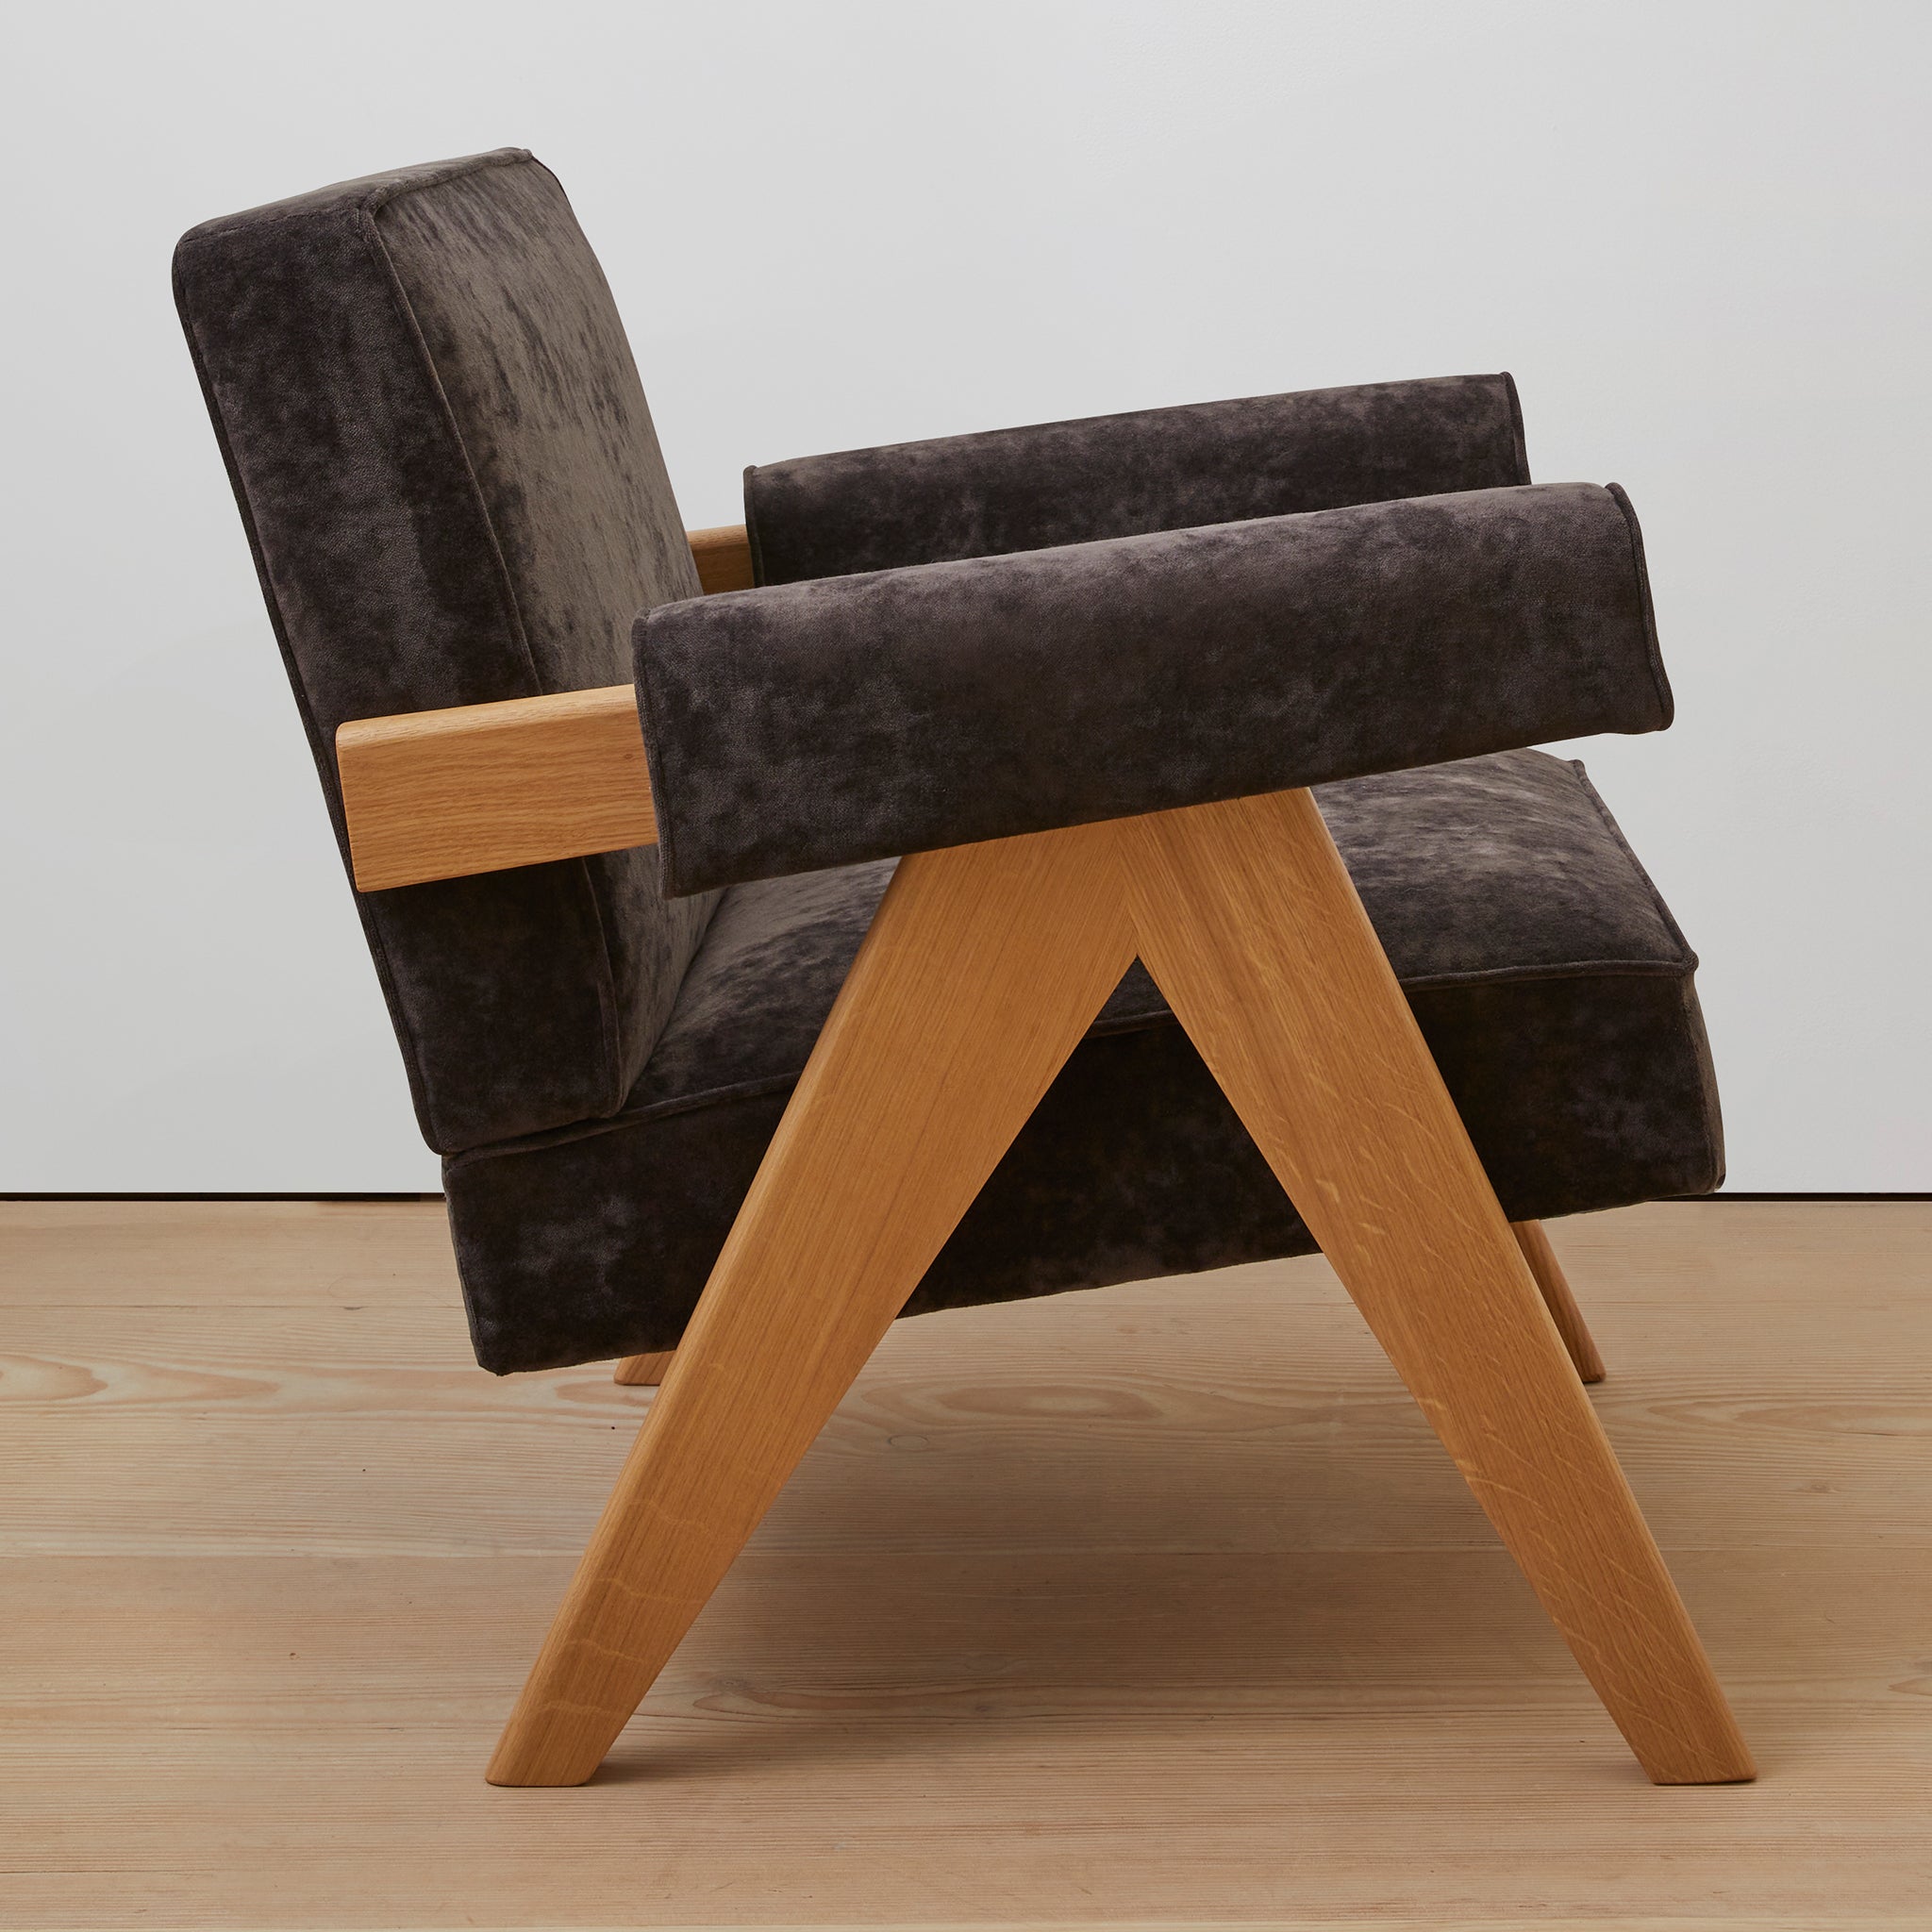 Side view of an authentic chandigarh lounge chair, pierre jeanneret era, natural oak frame, chocolate brown mohair upholstery, by Klarel #K35-36